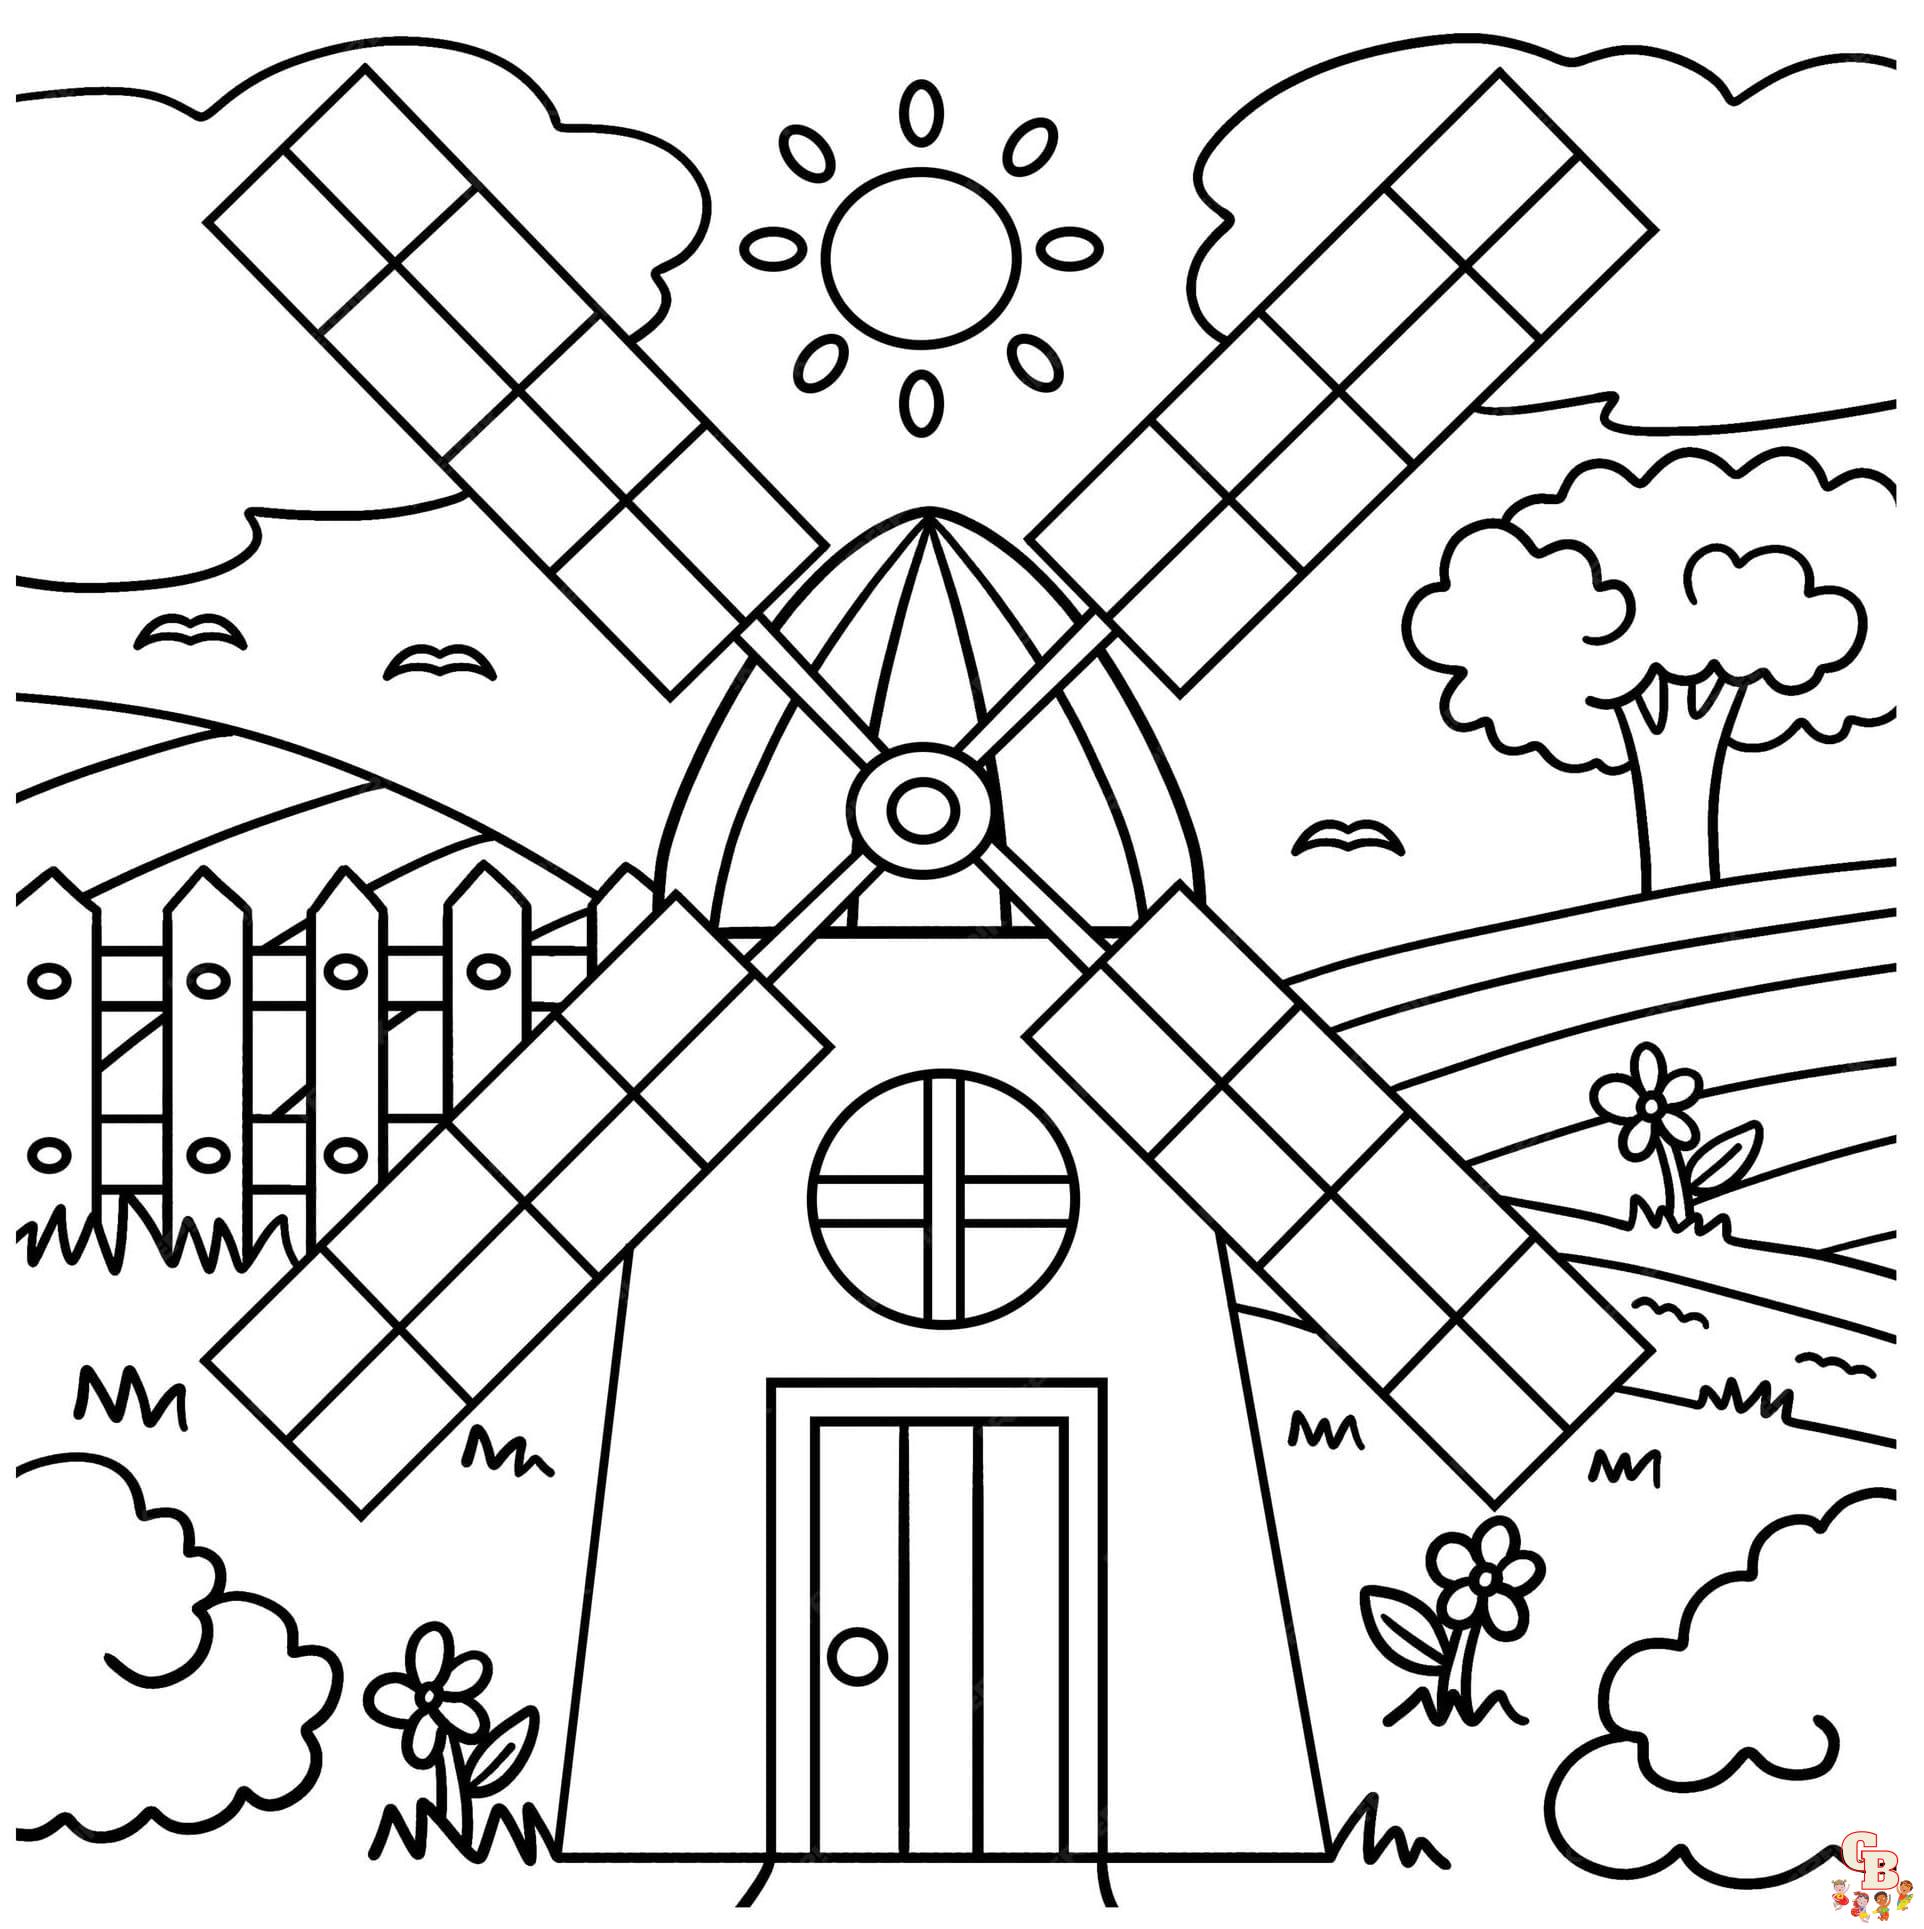 Windmill coloring pages printable free